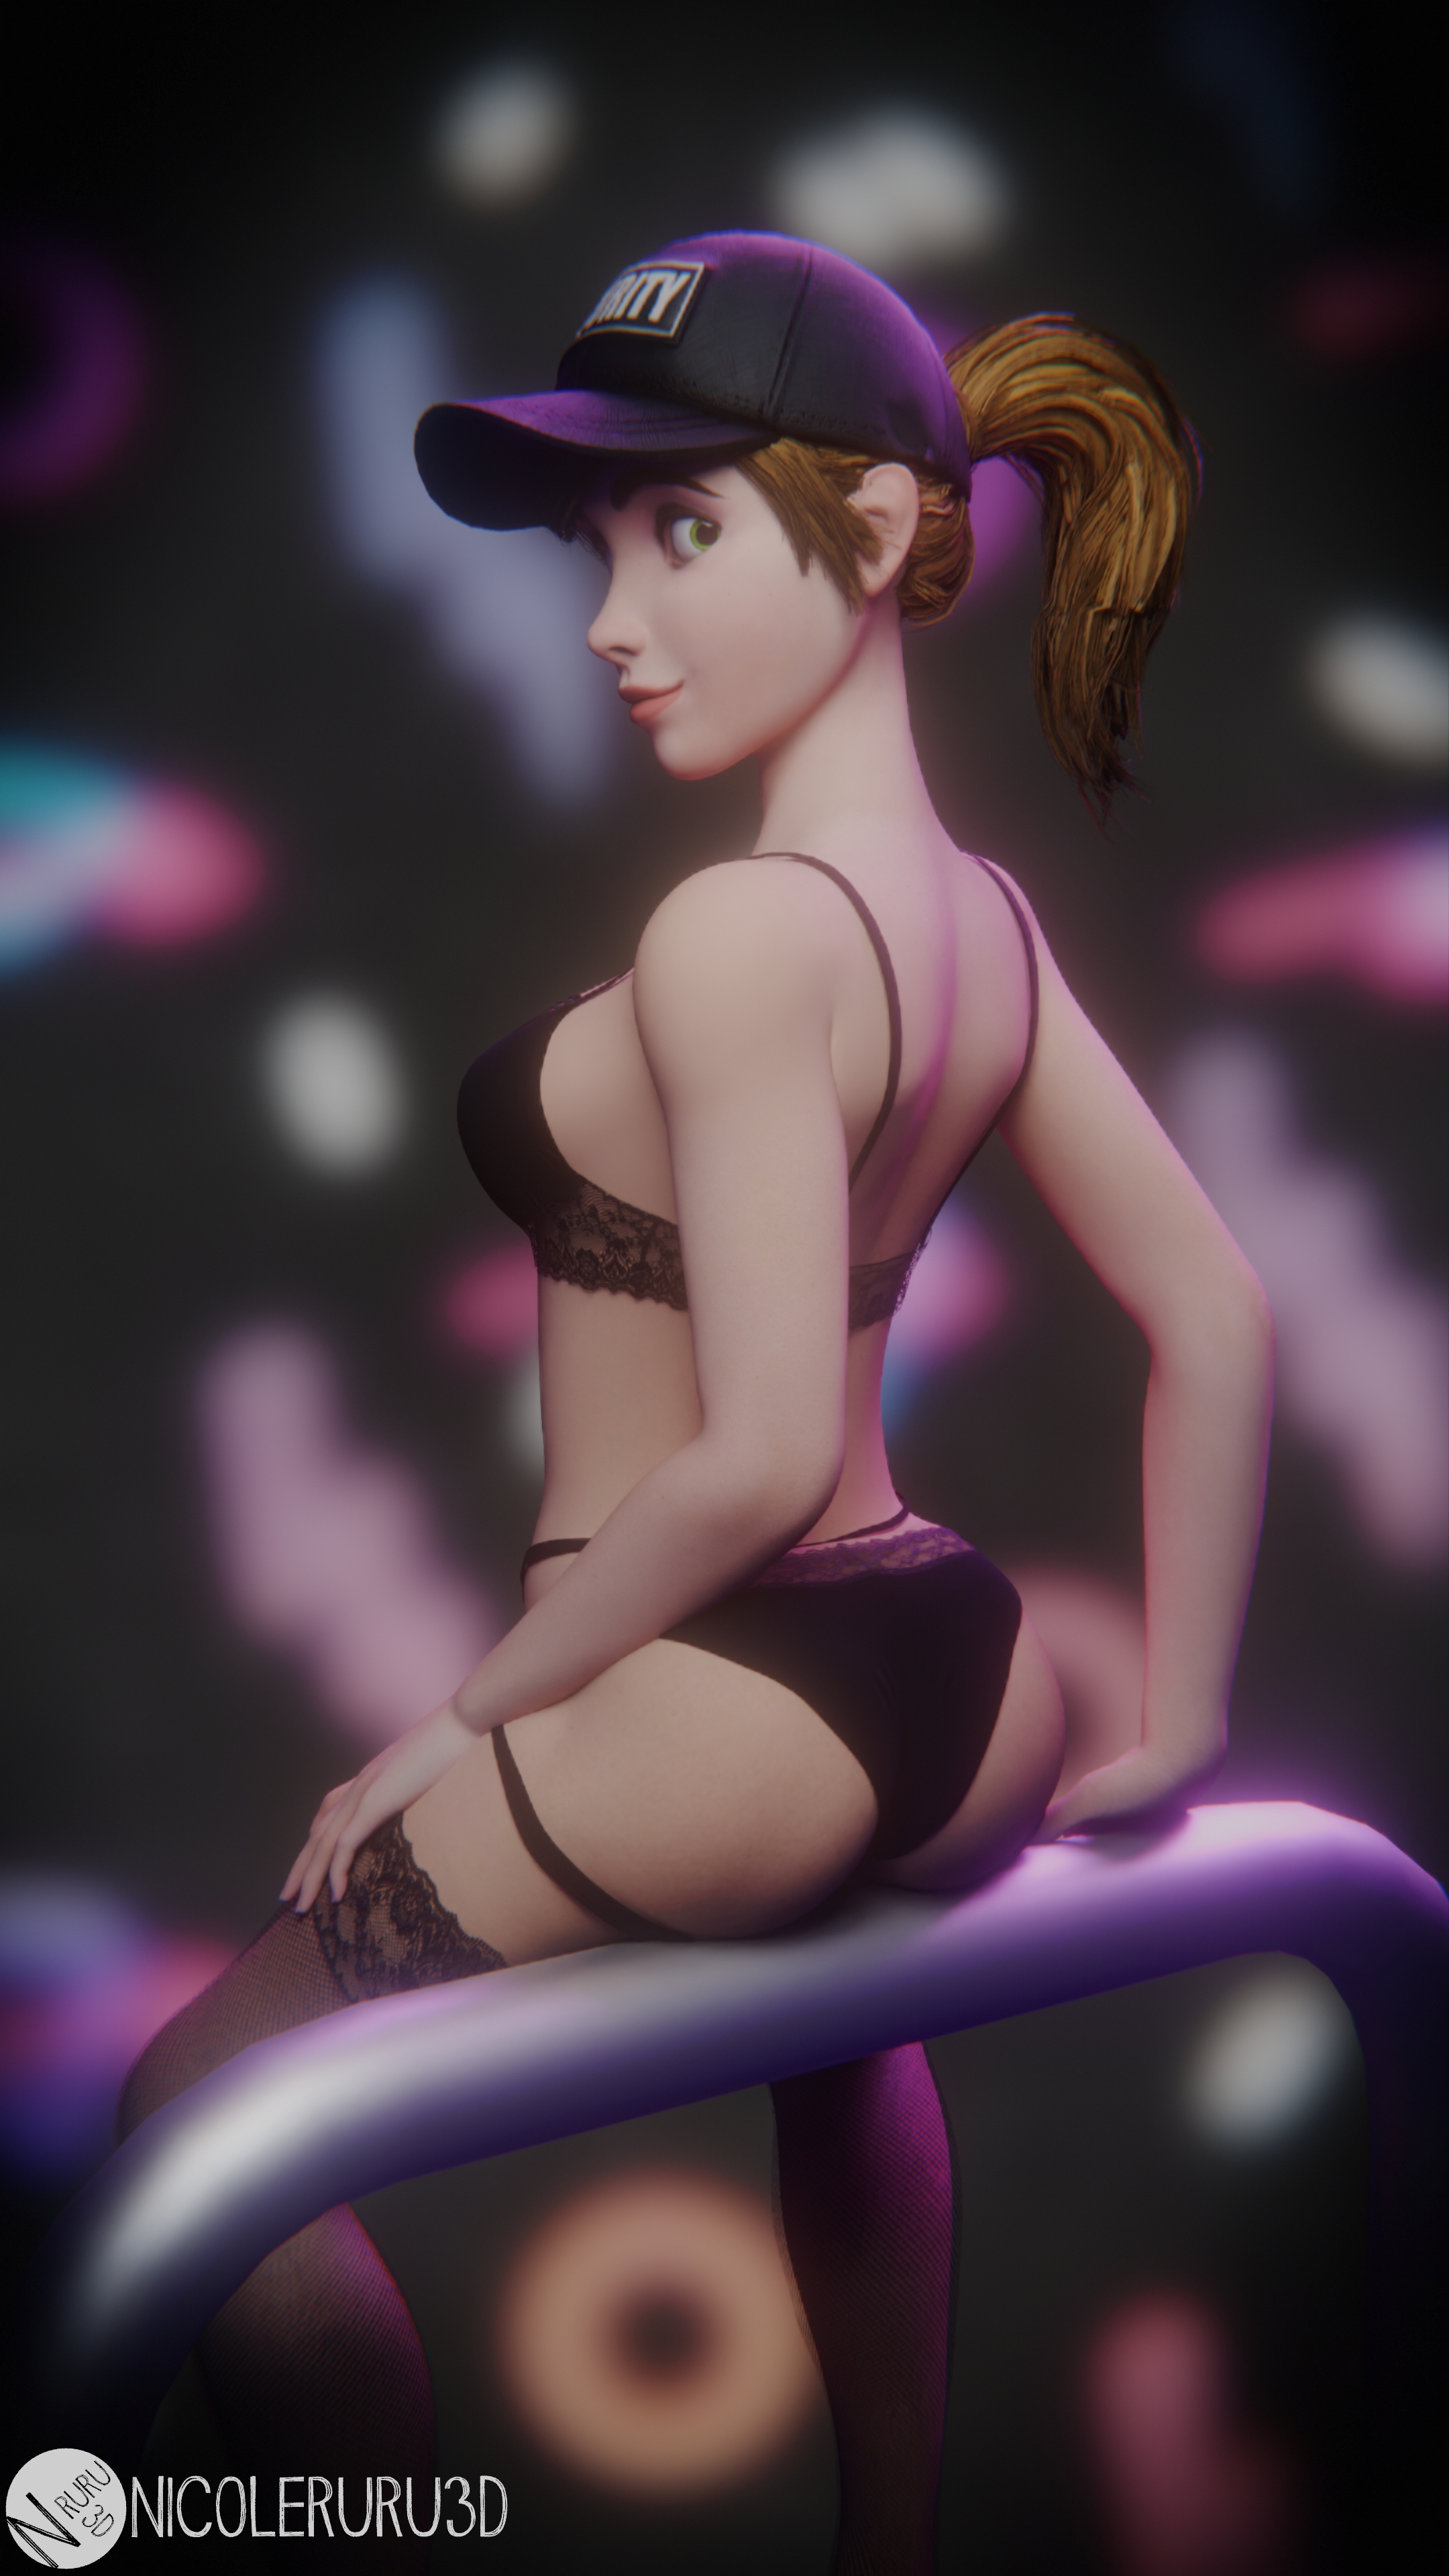 Vanessa FNAF (3 Pics) Vanessa Fnaf Five Nights At Freddys Five Nights At Freddy's Help Wanted Five Nights At Freddy S Security Breach Lingerie Sexy Lingerie 2